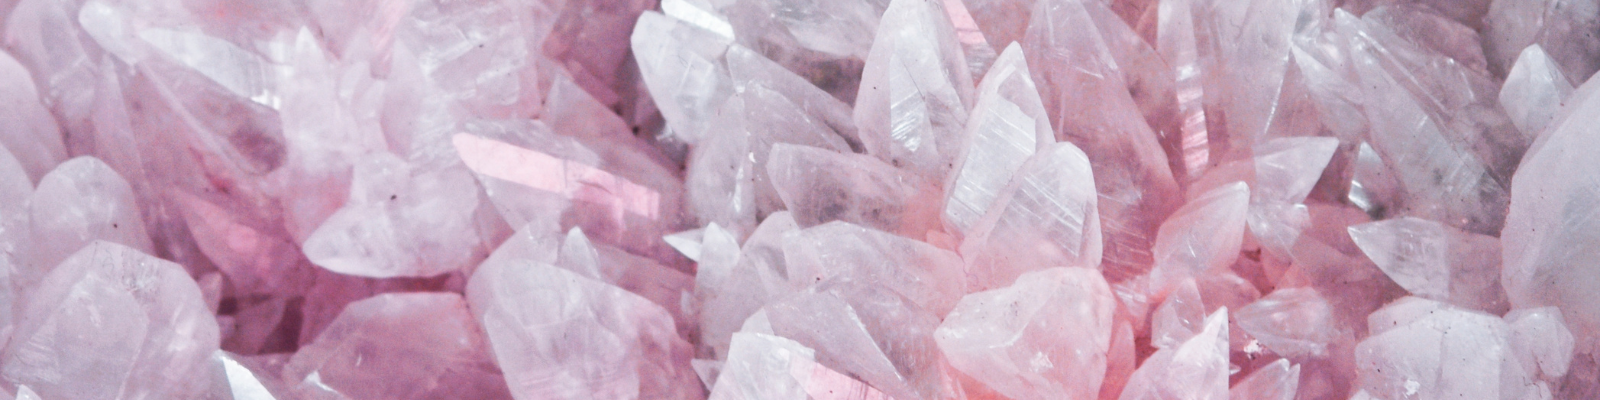 Image of Crystals